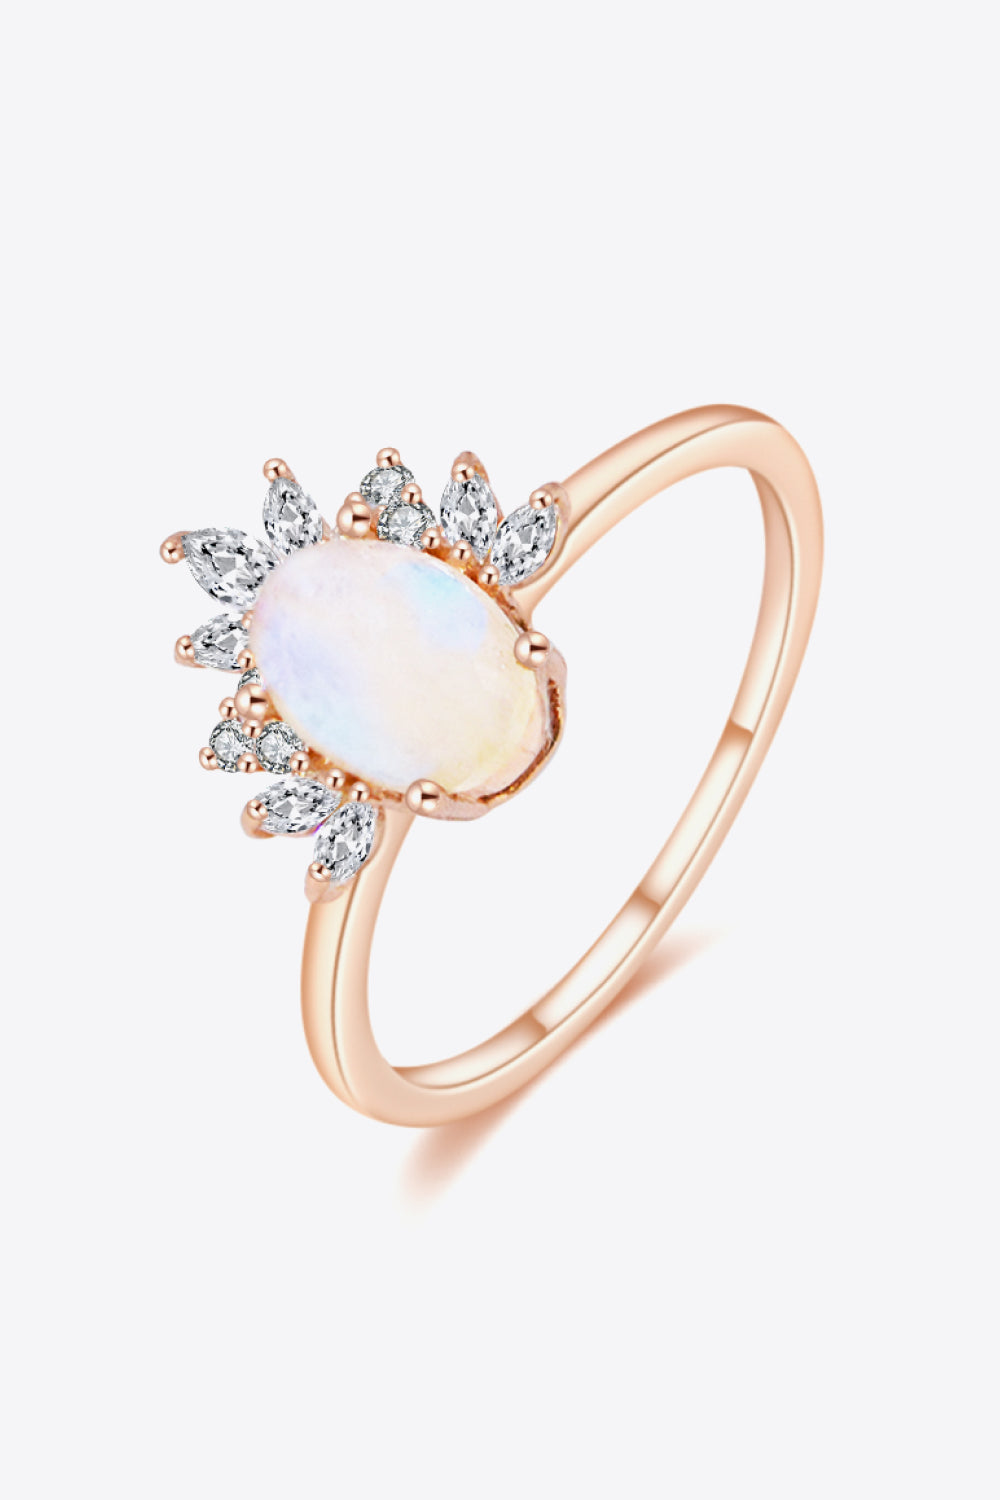 Discover the enchantment of moonstone rings with our Aura Natural Moonstone Ring collection. Embrace the ethereal beauty of these rings.